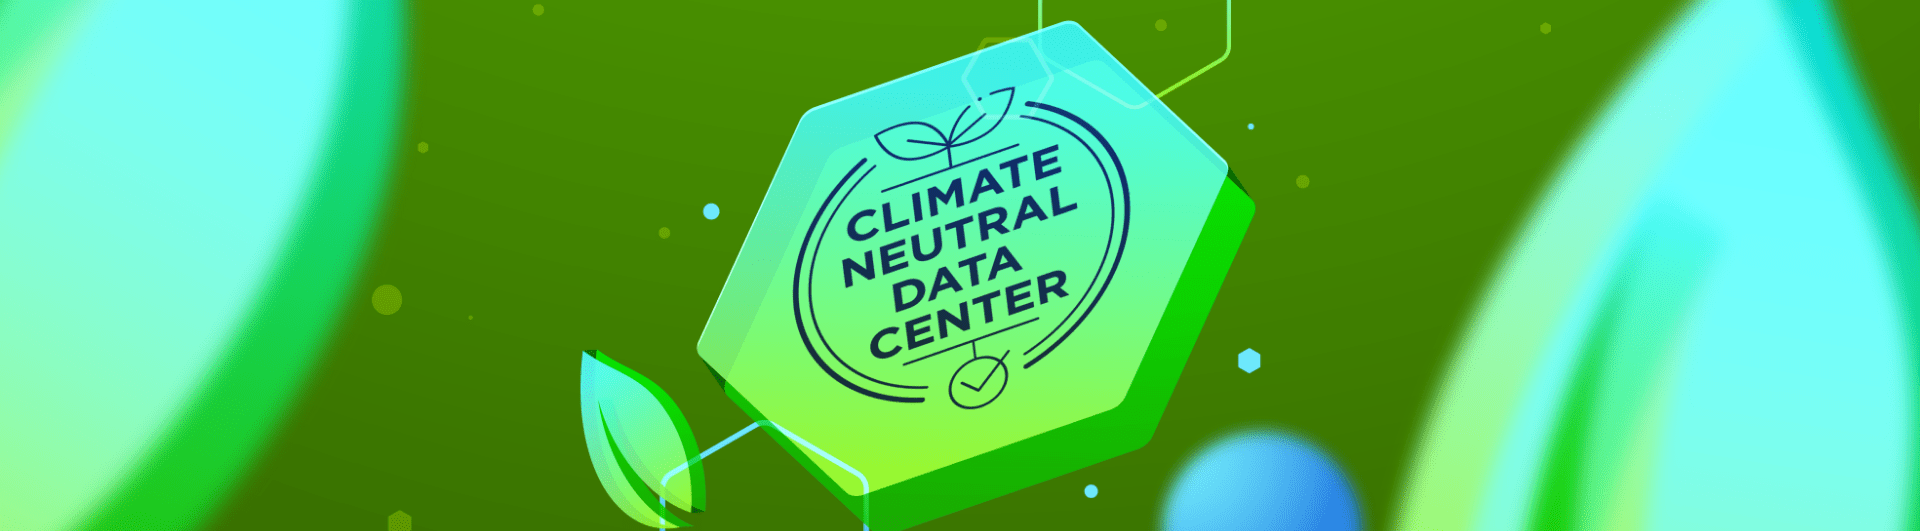 Leaseweb Awarded Climate Neutral Data Center Certificate